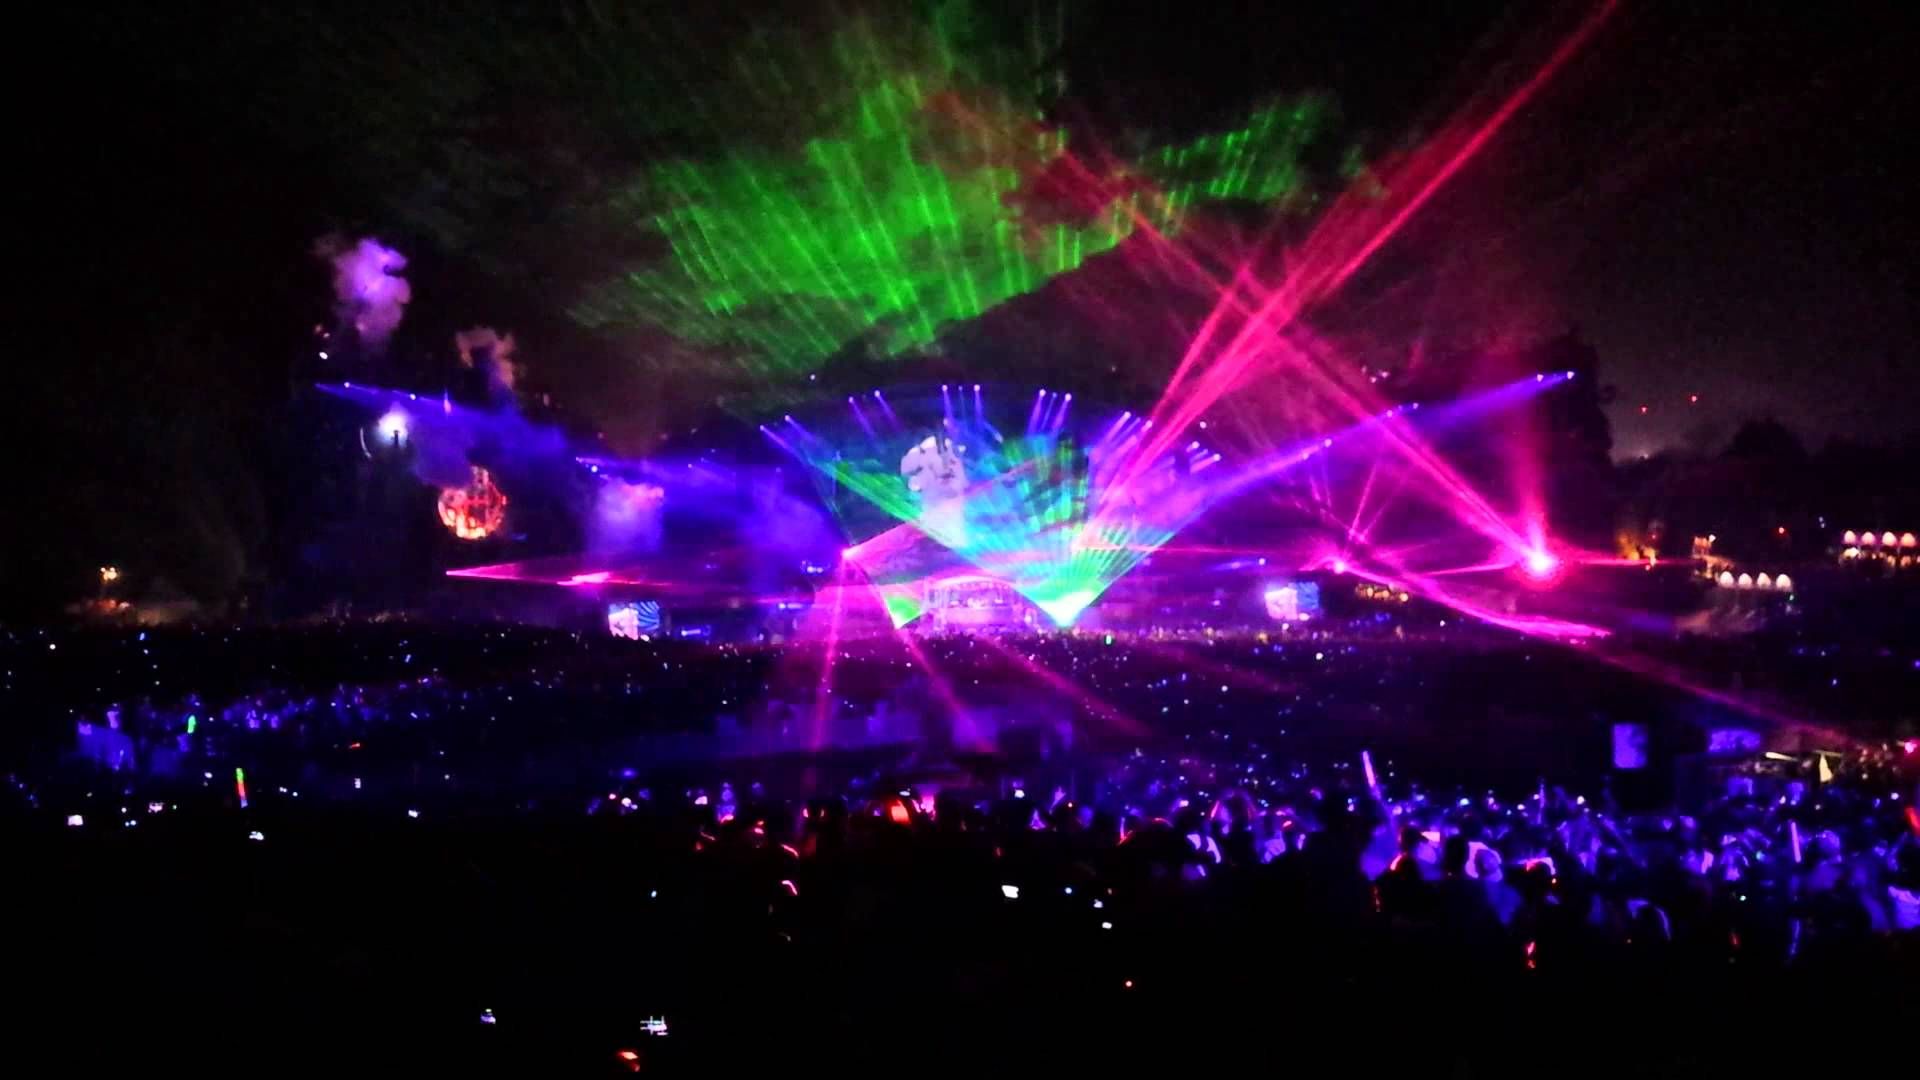 Tomorrowland crazy lasers and lights are legend hd sports images sports wallpapers background images hd